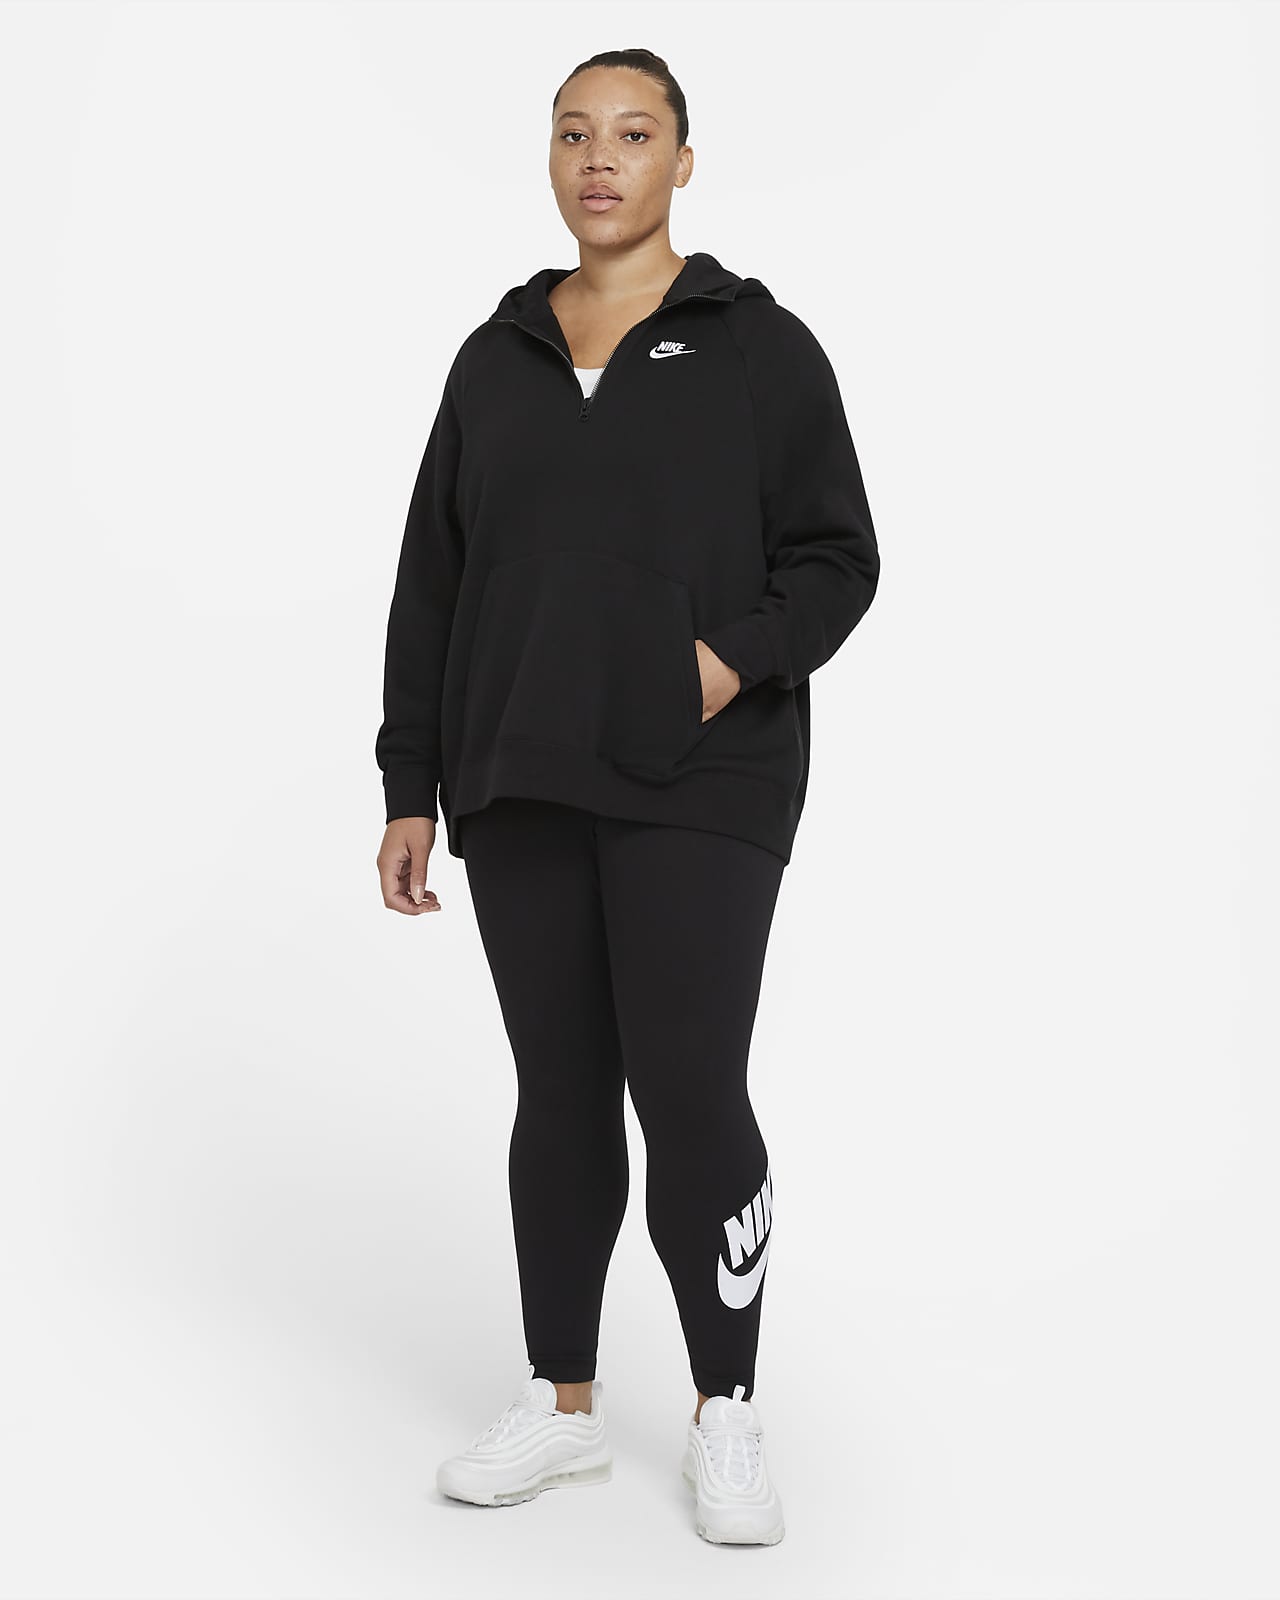 https://static.nike.com/a/images/t_PDP_1280_v1/f_auto,q_auto:eco/c0124bfe-5ac9-4022-9501-635449a50c12/sportswear-essential-womens-high-waisted-leggings-plus-size-V8D5TH.png